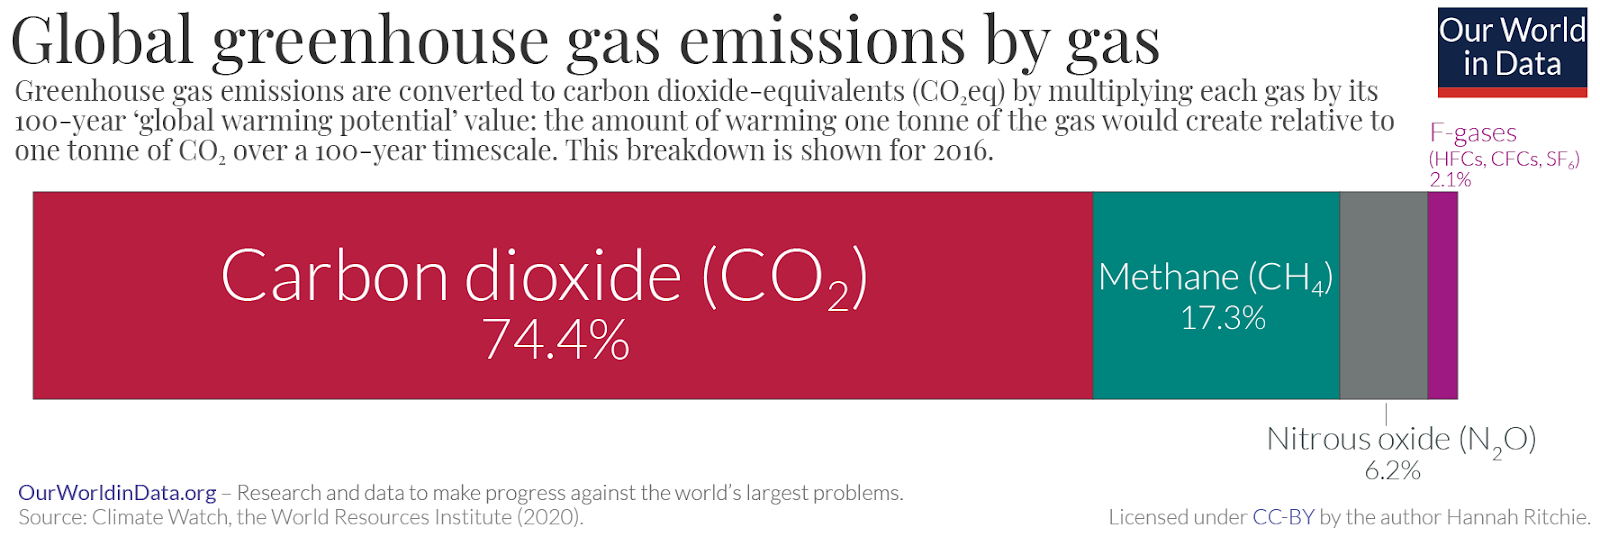 ESG_Series_Environmental_Part_4_Energy_Electricity_and_Emissions-GHG emissions by type.png